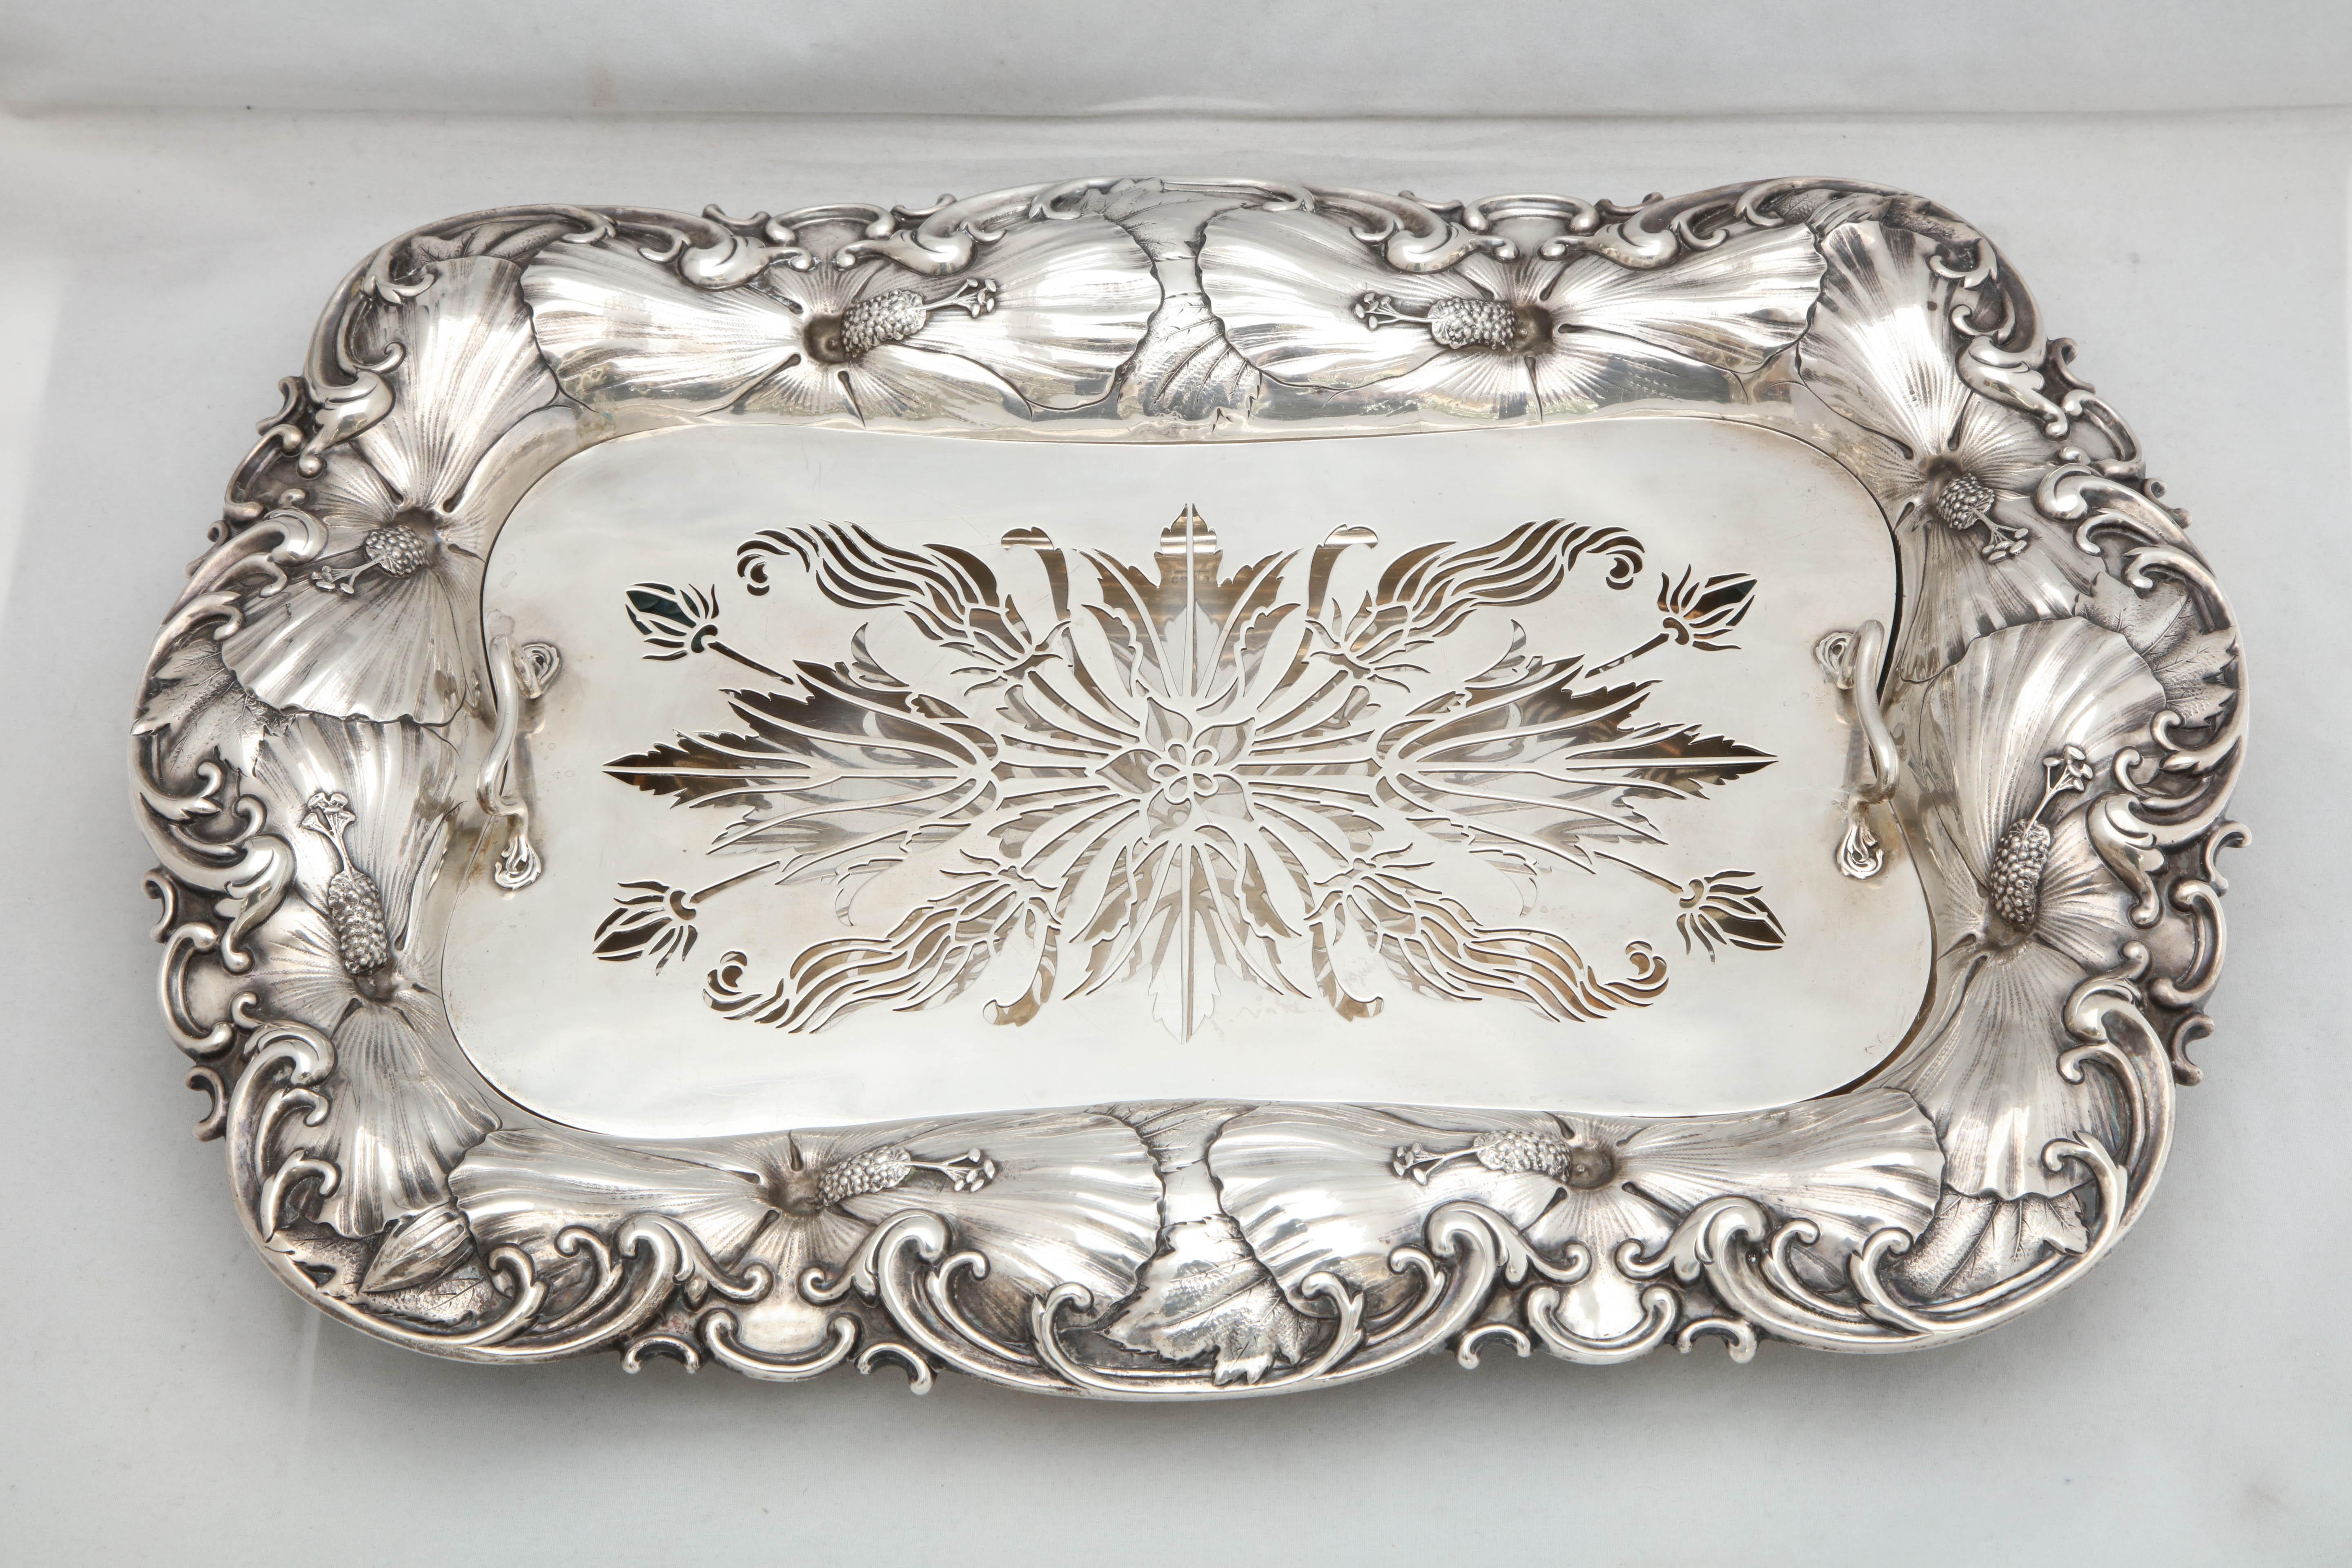 Art Nouveau, sterling silver asparagus dish with matching, sterling silver, removable liner, Whiting Mfg. Co., New York, circa 1900. Pierced, handled liner. Chased with Art Nouveau flowers and scrolls. Measures 16 1/4 inches long x 11 inches deep x